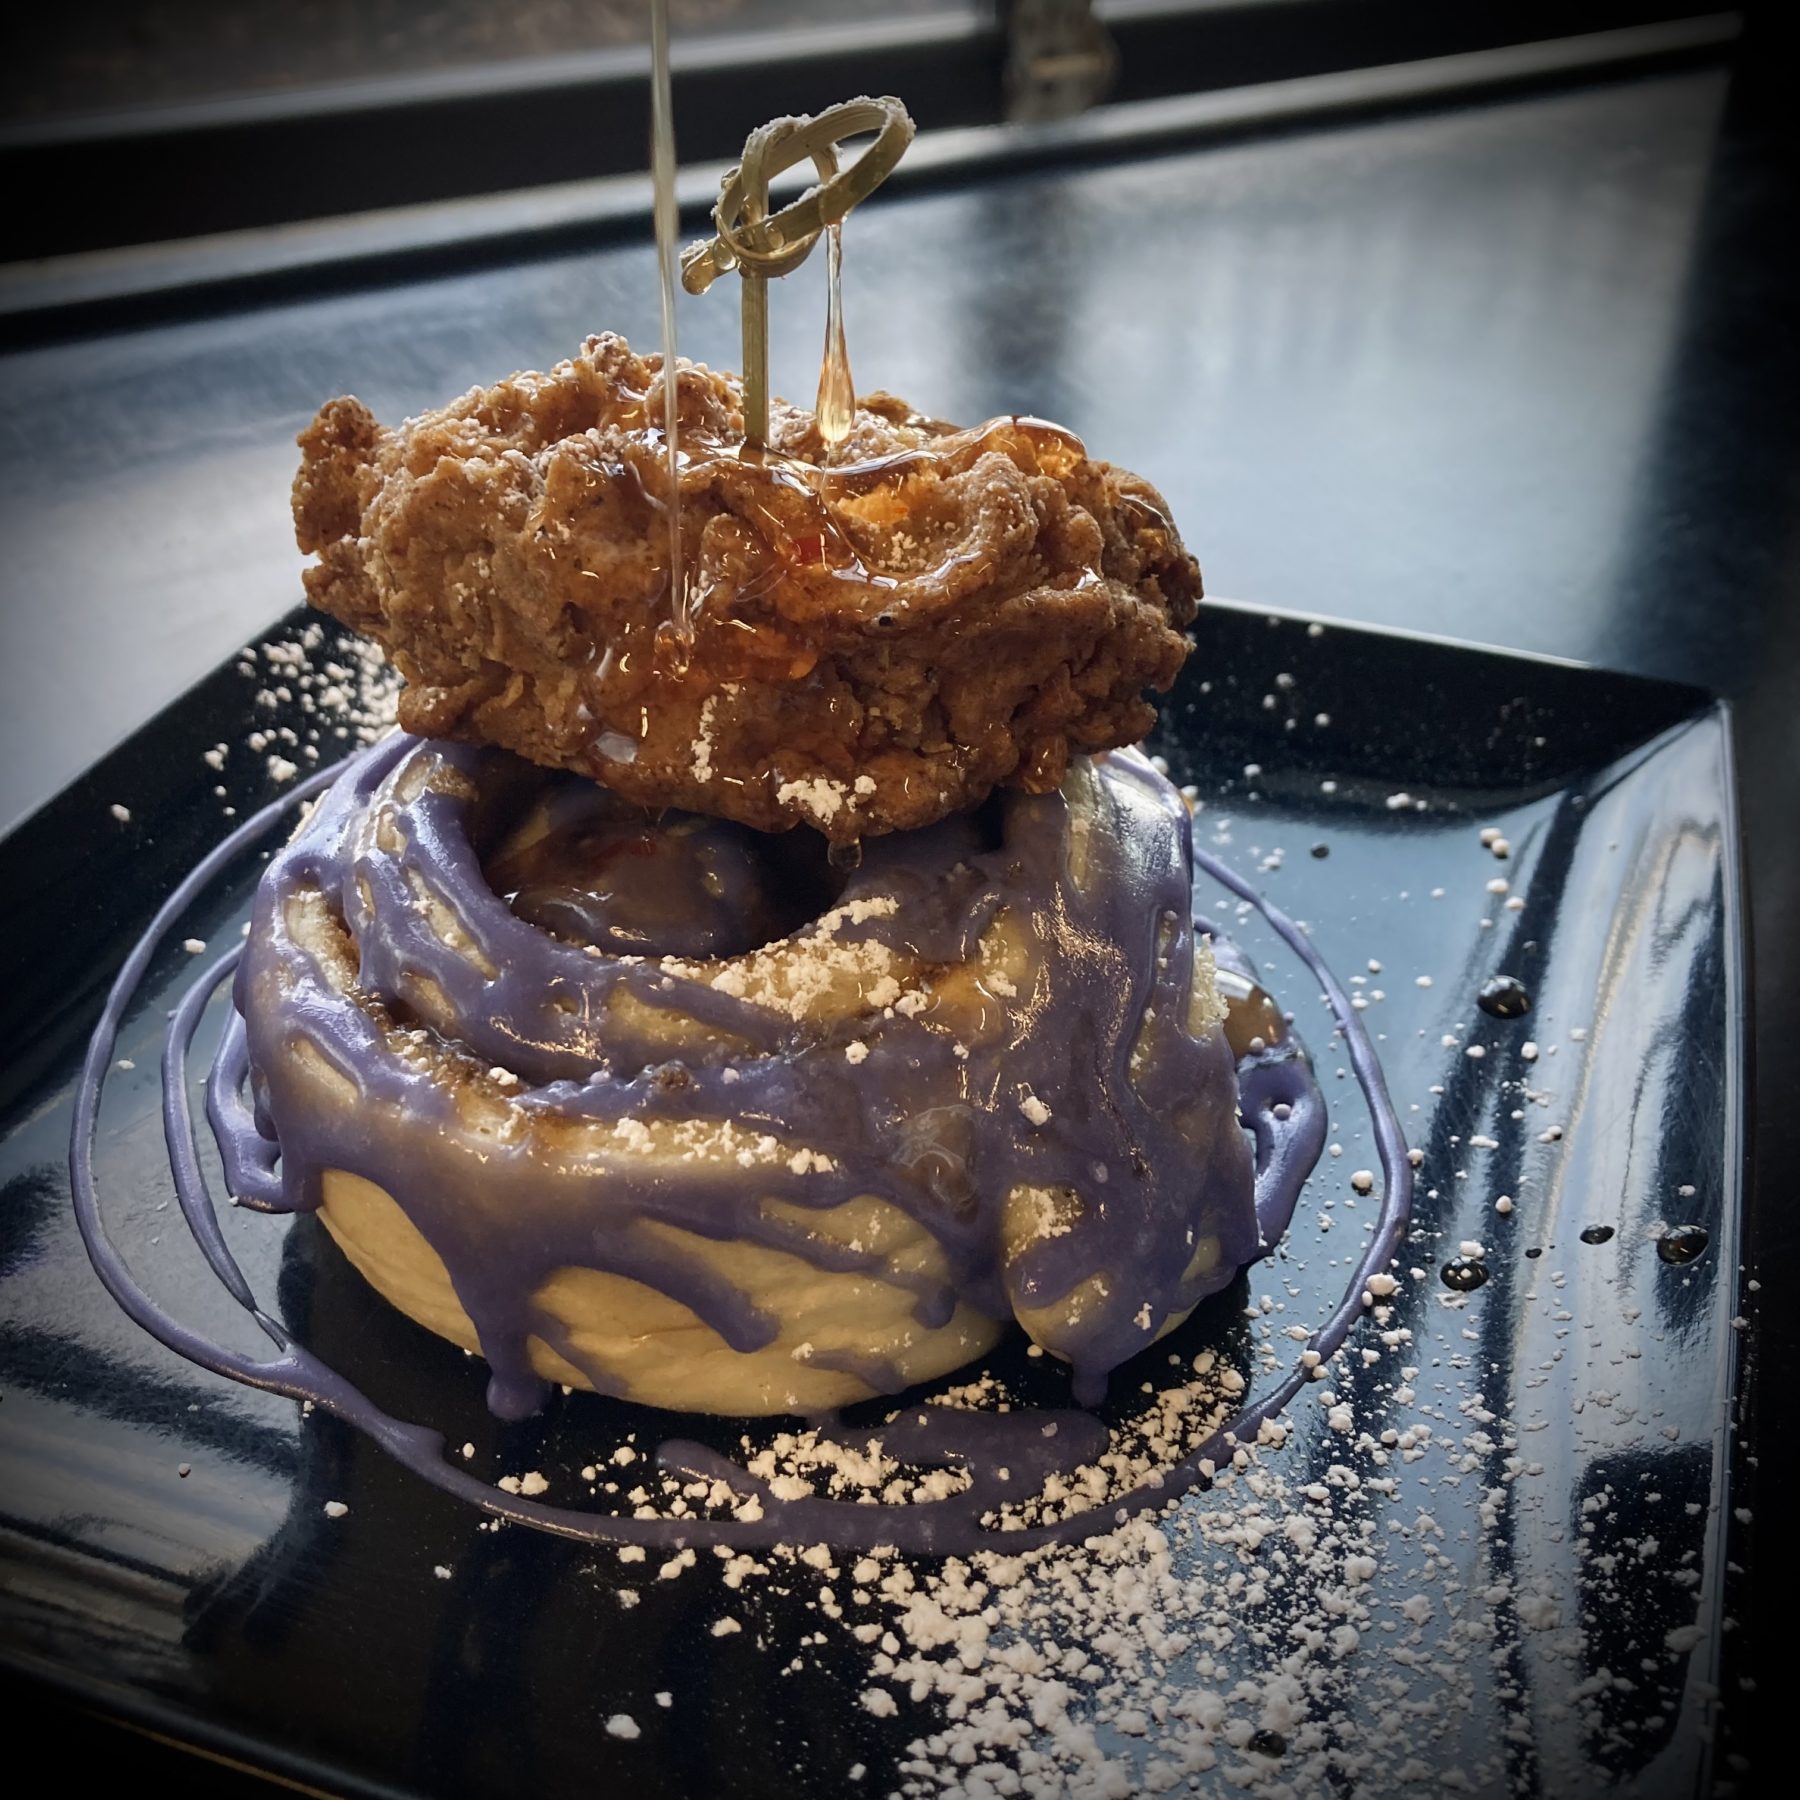 Hail Snail's cinnamon roll topped with purple syrup, vegan chicken, and spicy vegan honey